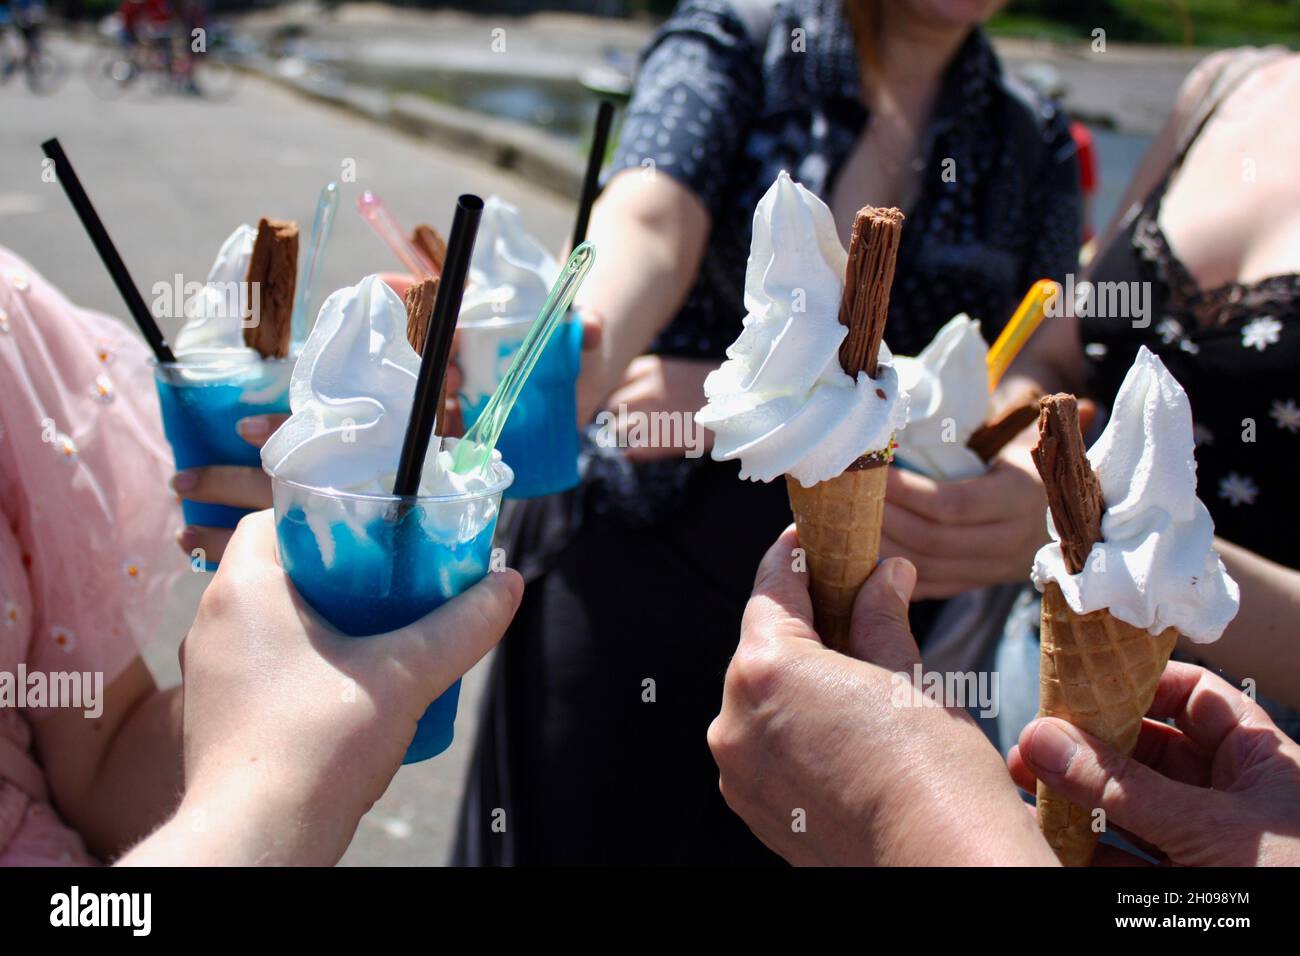 A group of people on holiday hold ice creams and slushie drinks in a circle Stock Photo